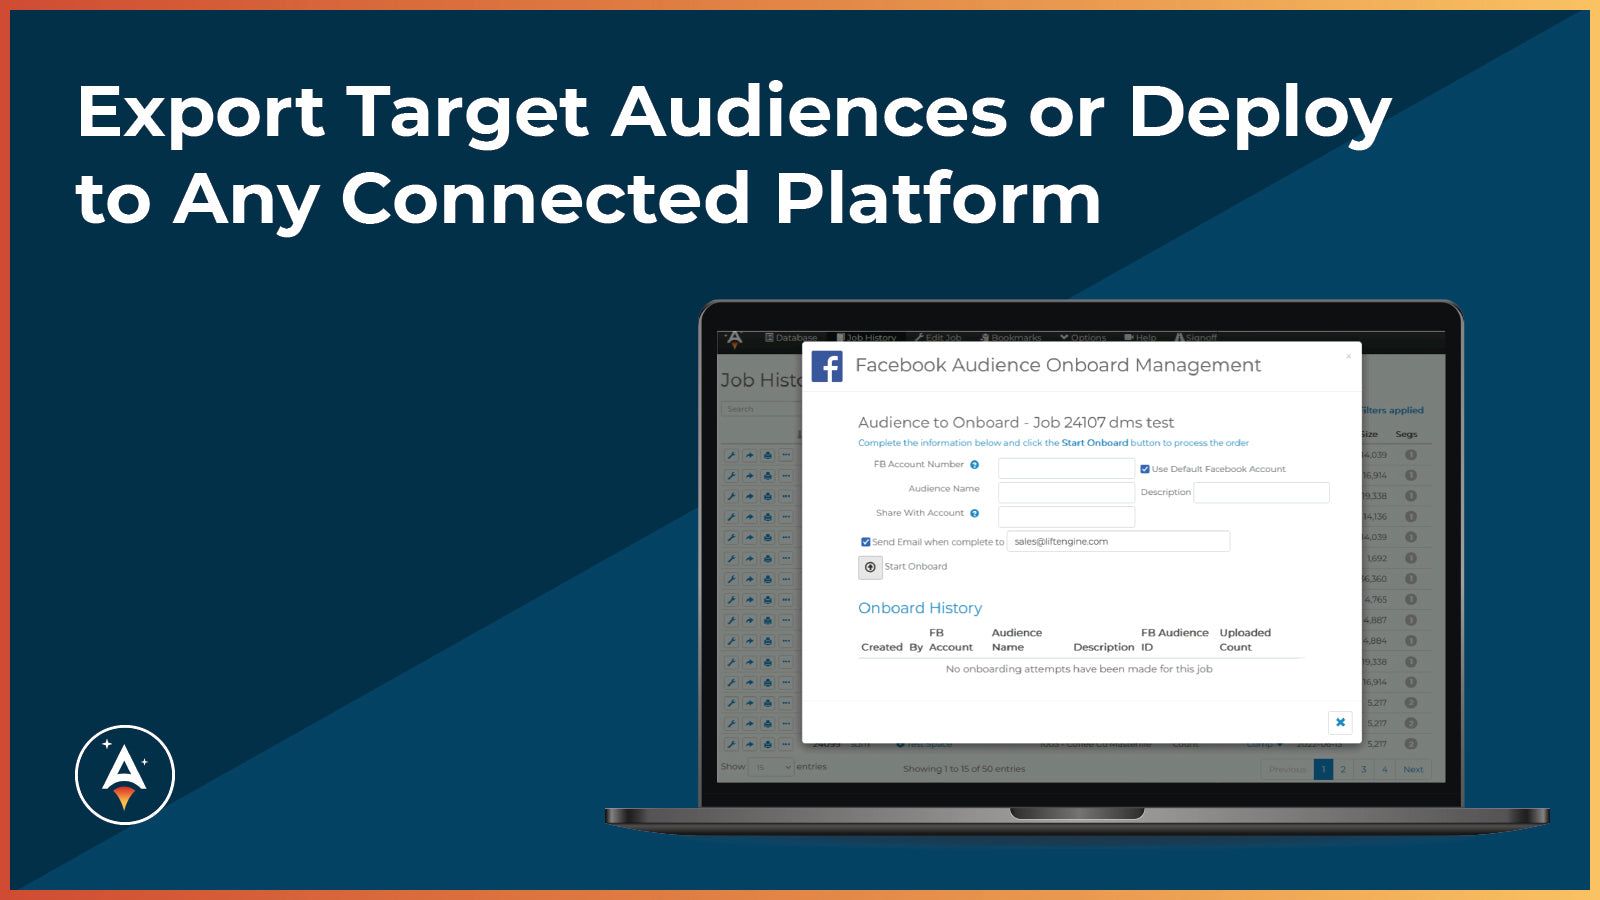 Export target audiences or deploy to any connected platform.